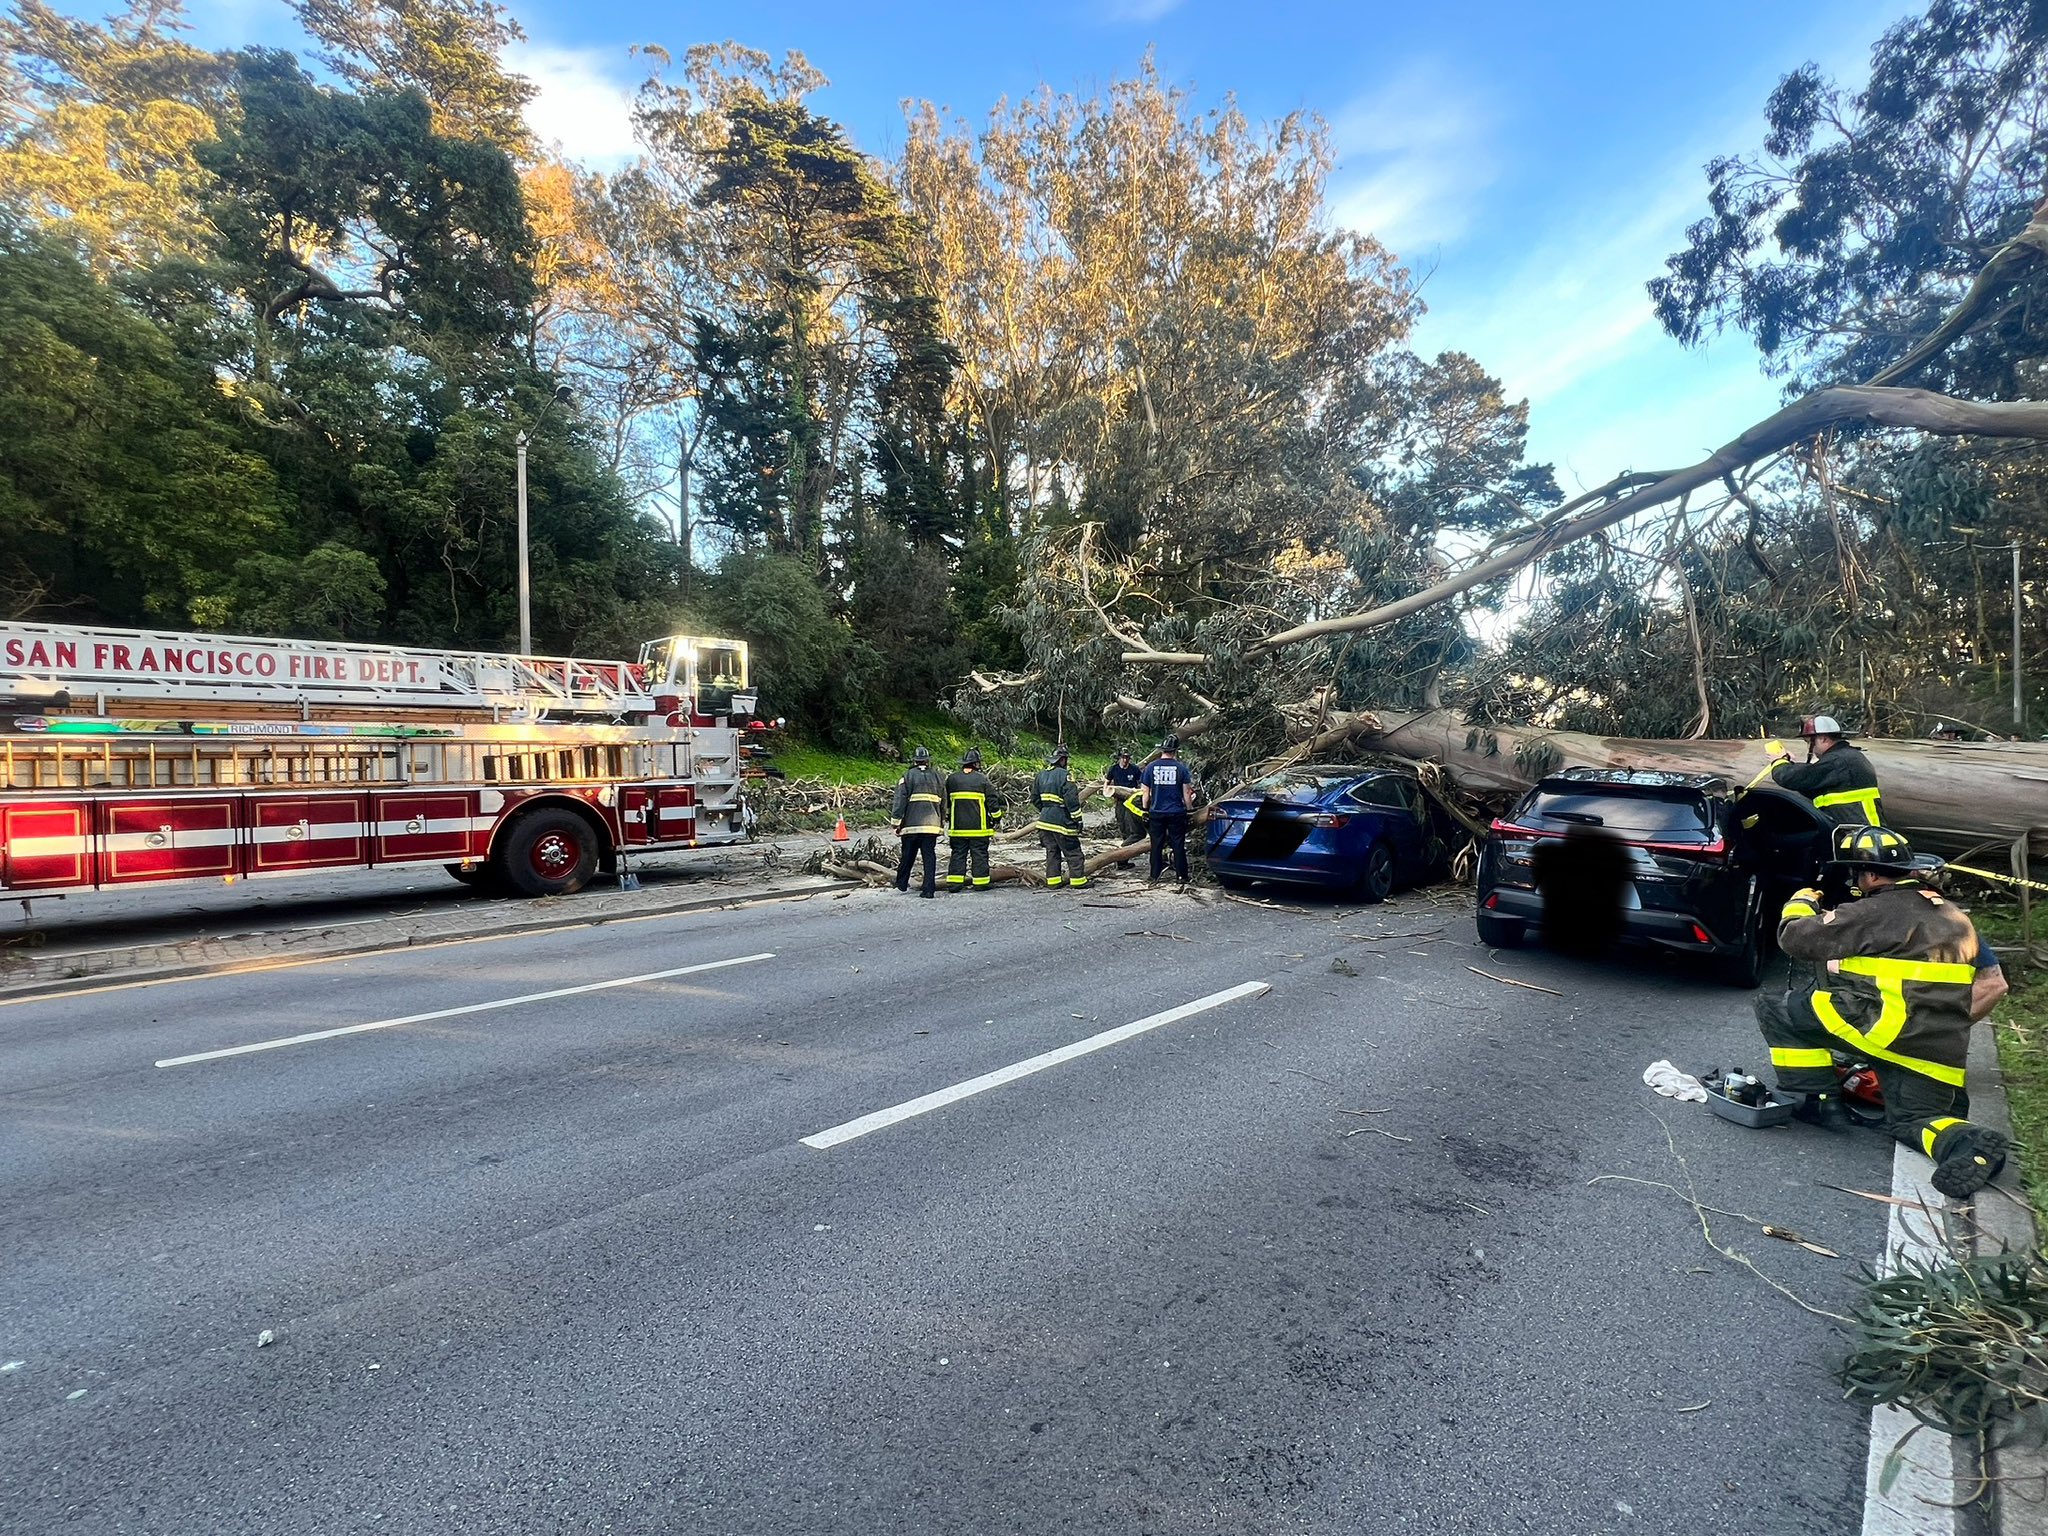 A large fallen tree across a road, with damaged cars and firefighters from the San Francisco Fire Dept on scene.